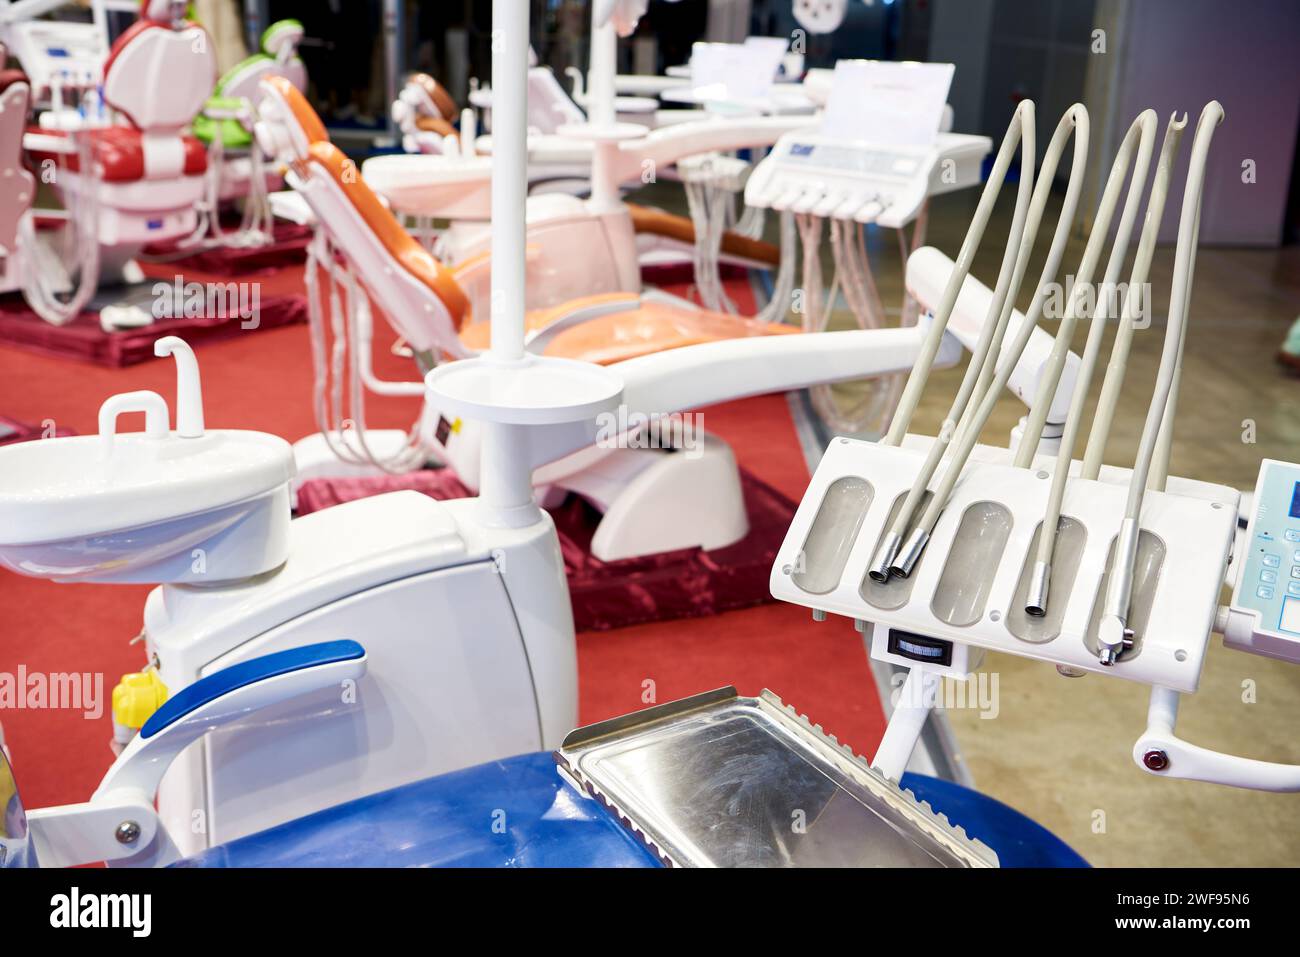 Dental chair and clinic equipment at the exhibition Stock Photo